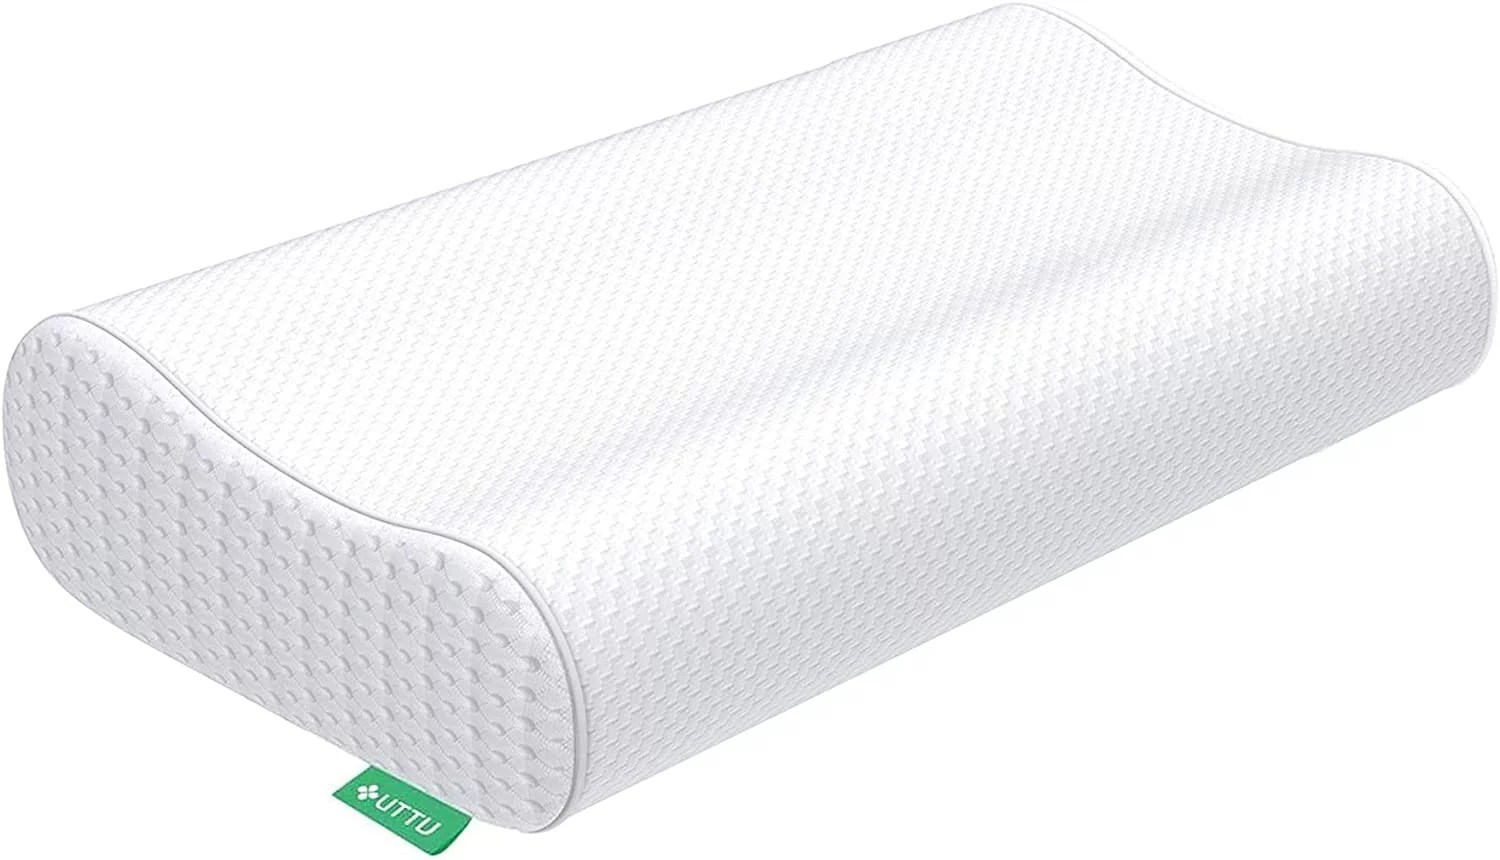 uttu sandwich pillow, one of the best pillows for side sleepers, on a white background